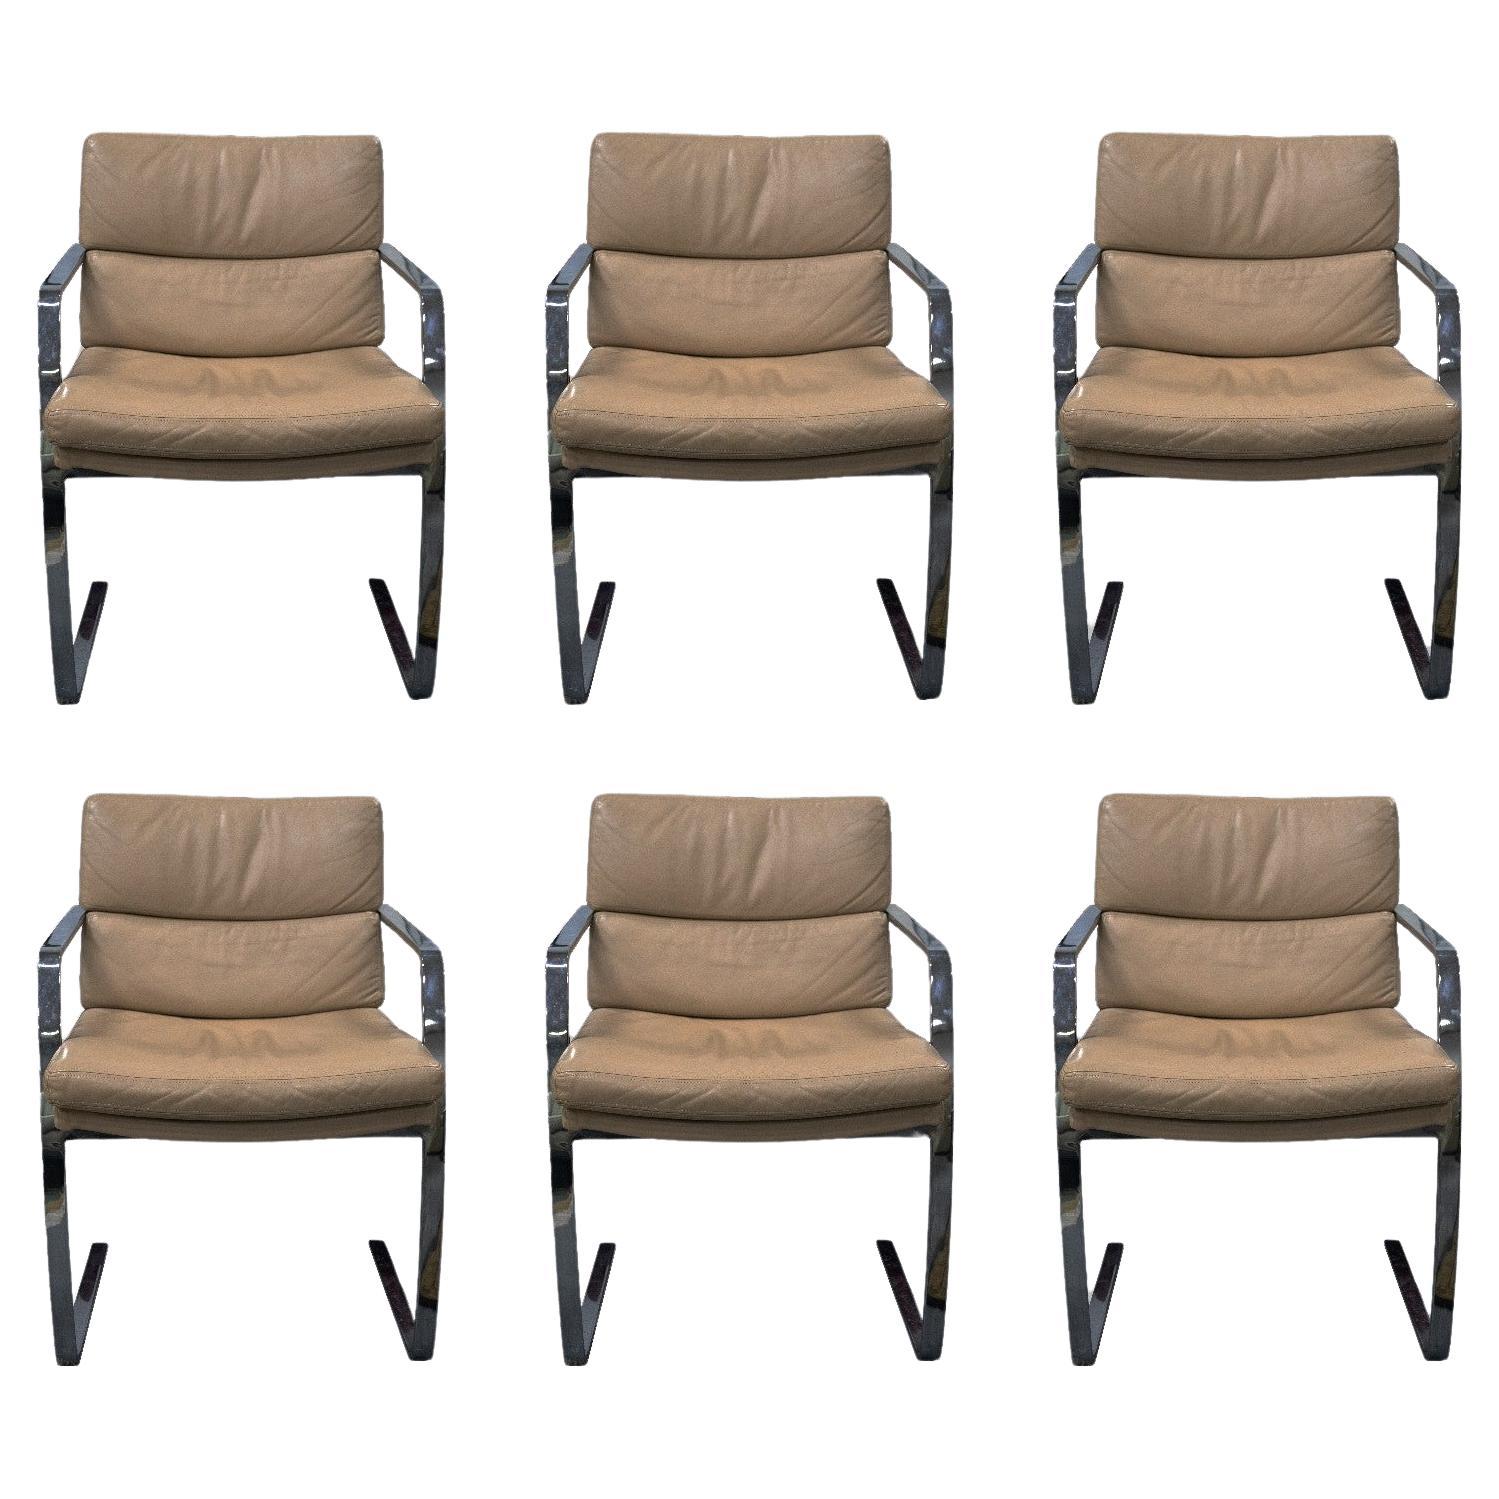 Set of 6 Milo Baughman Leather and Chrome Cantilever Chairs Mid Century Modern